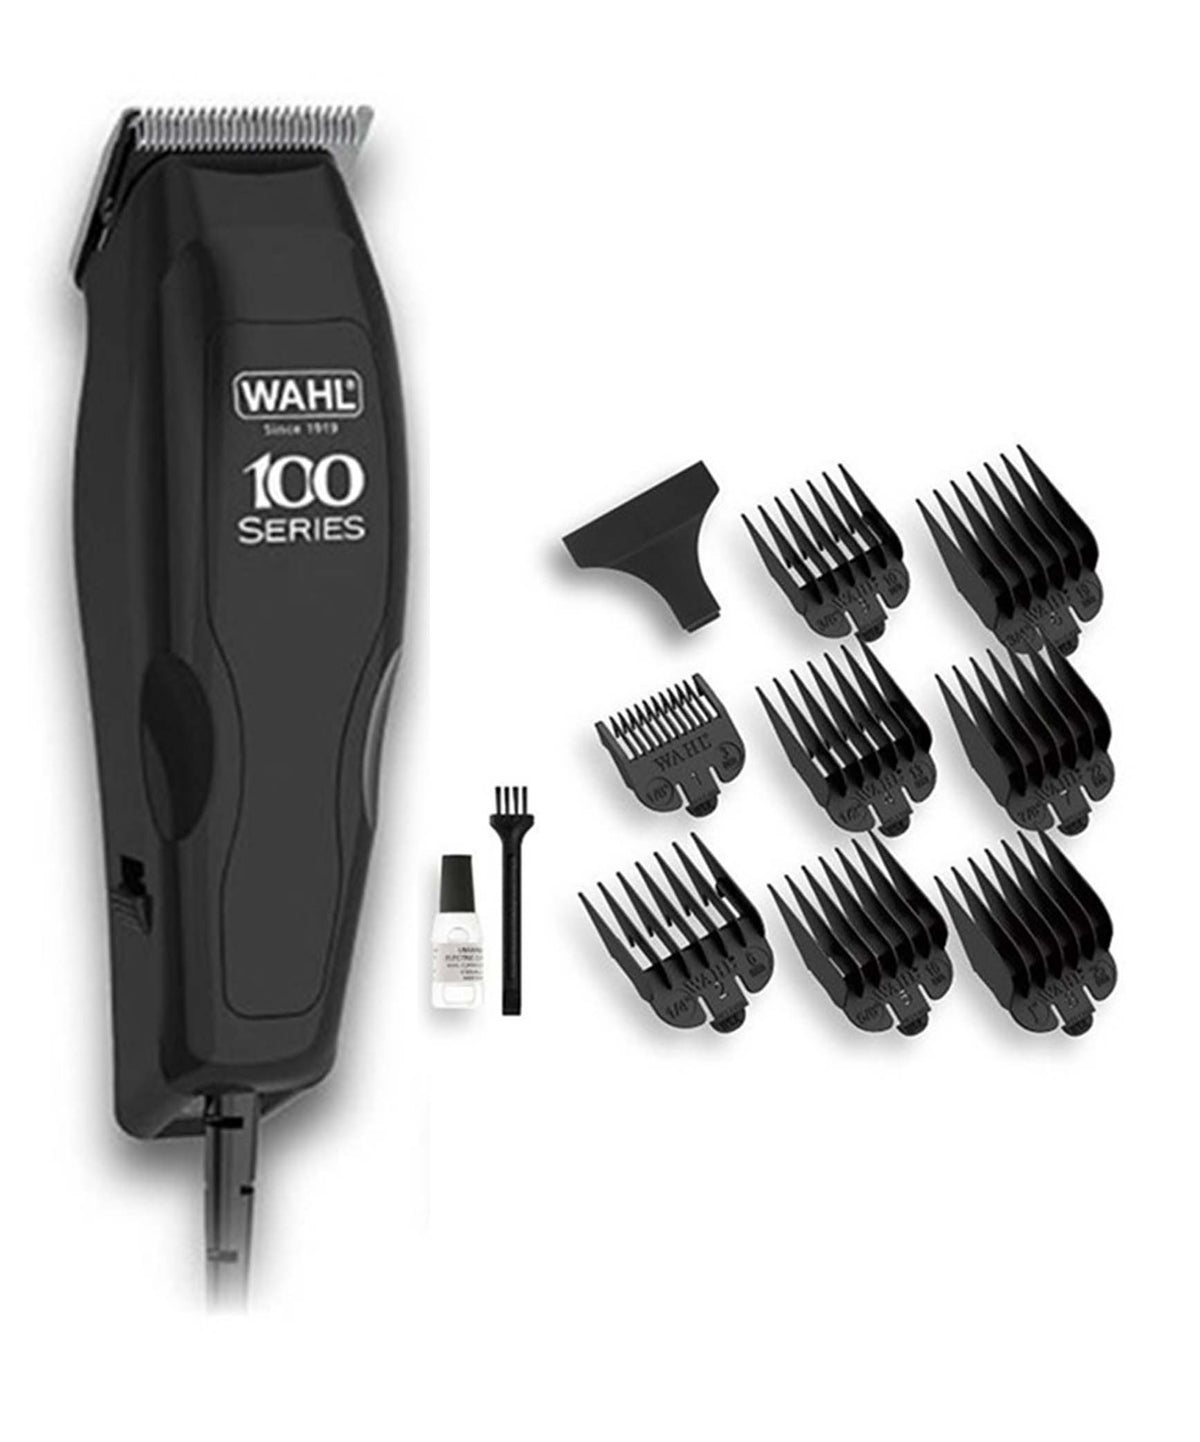 Wahl Homepro 100 3 Pin Hair Clipper, 1395-0410